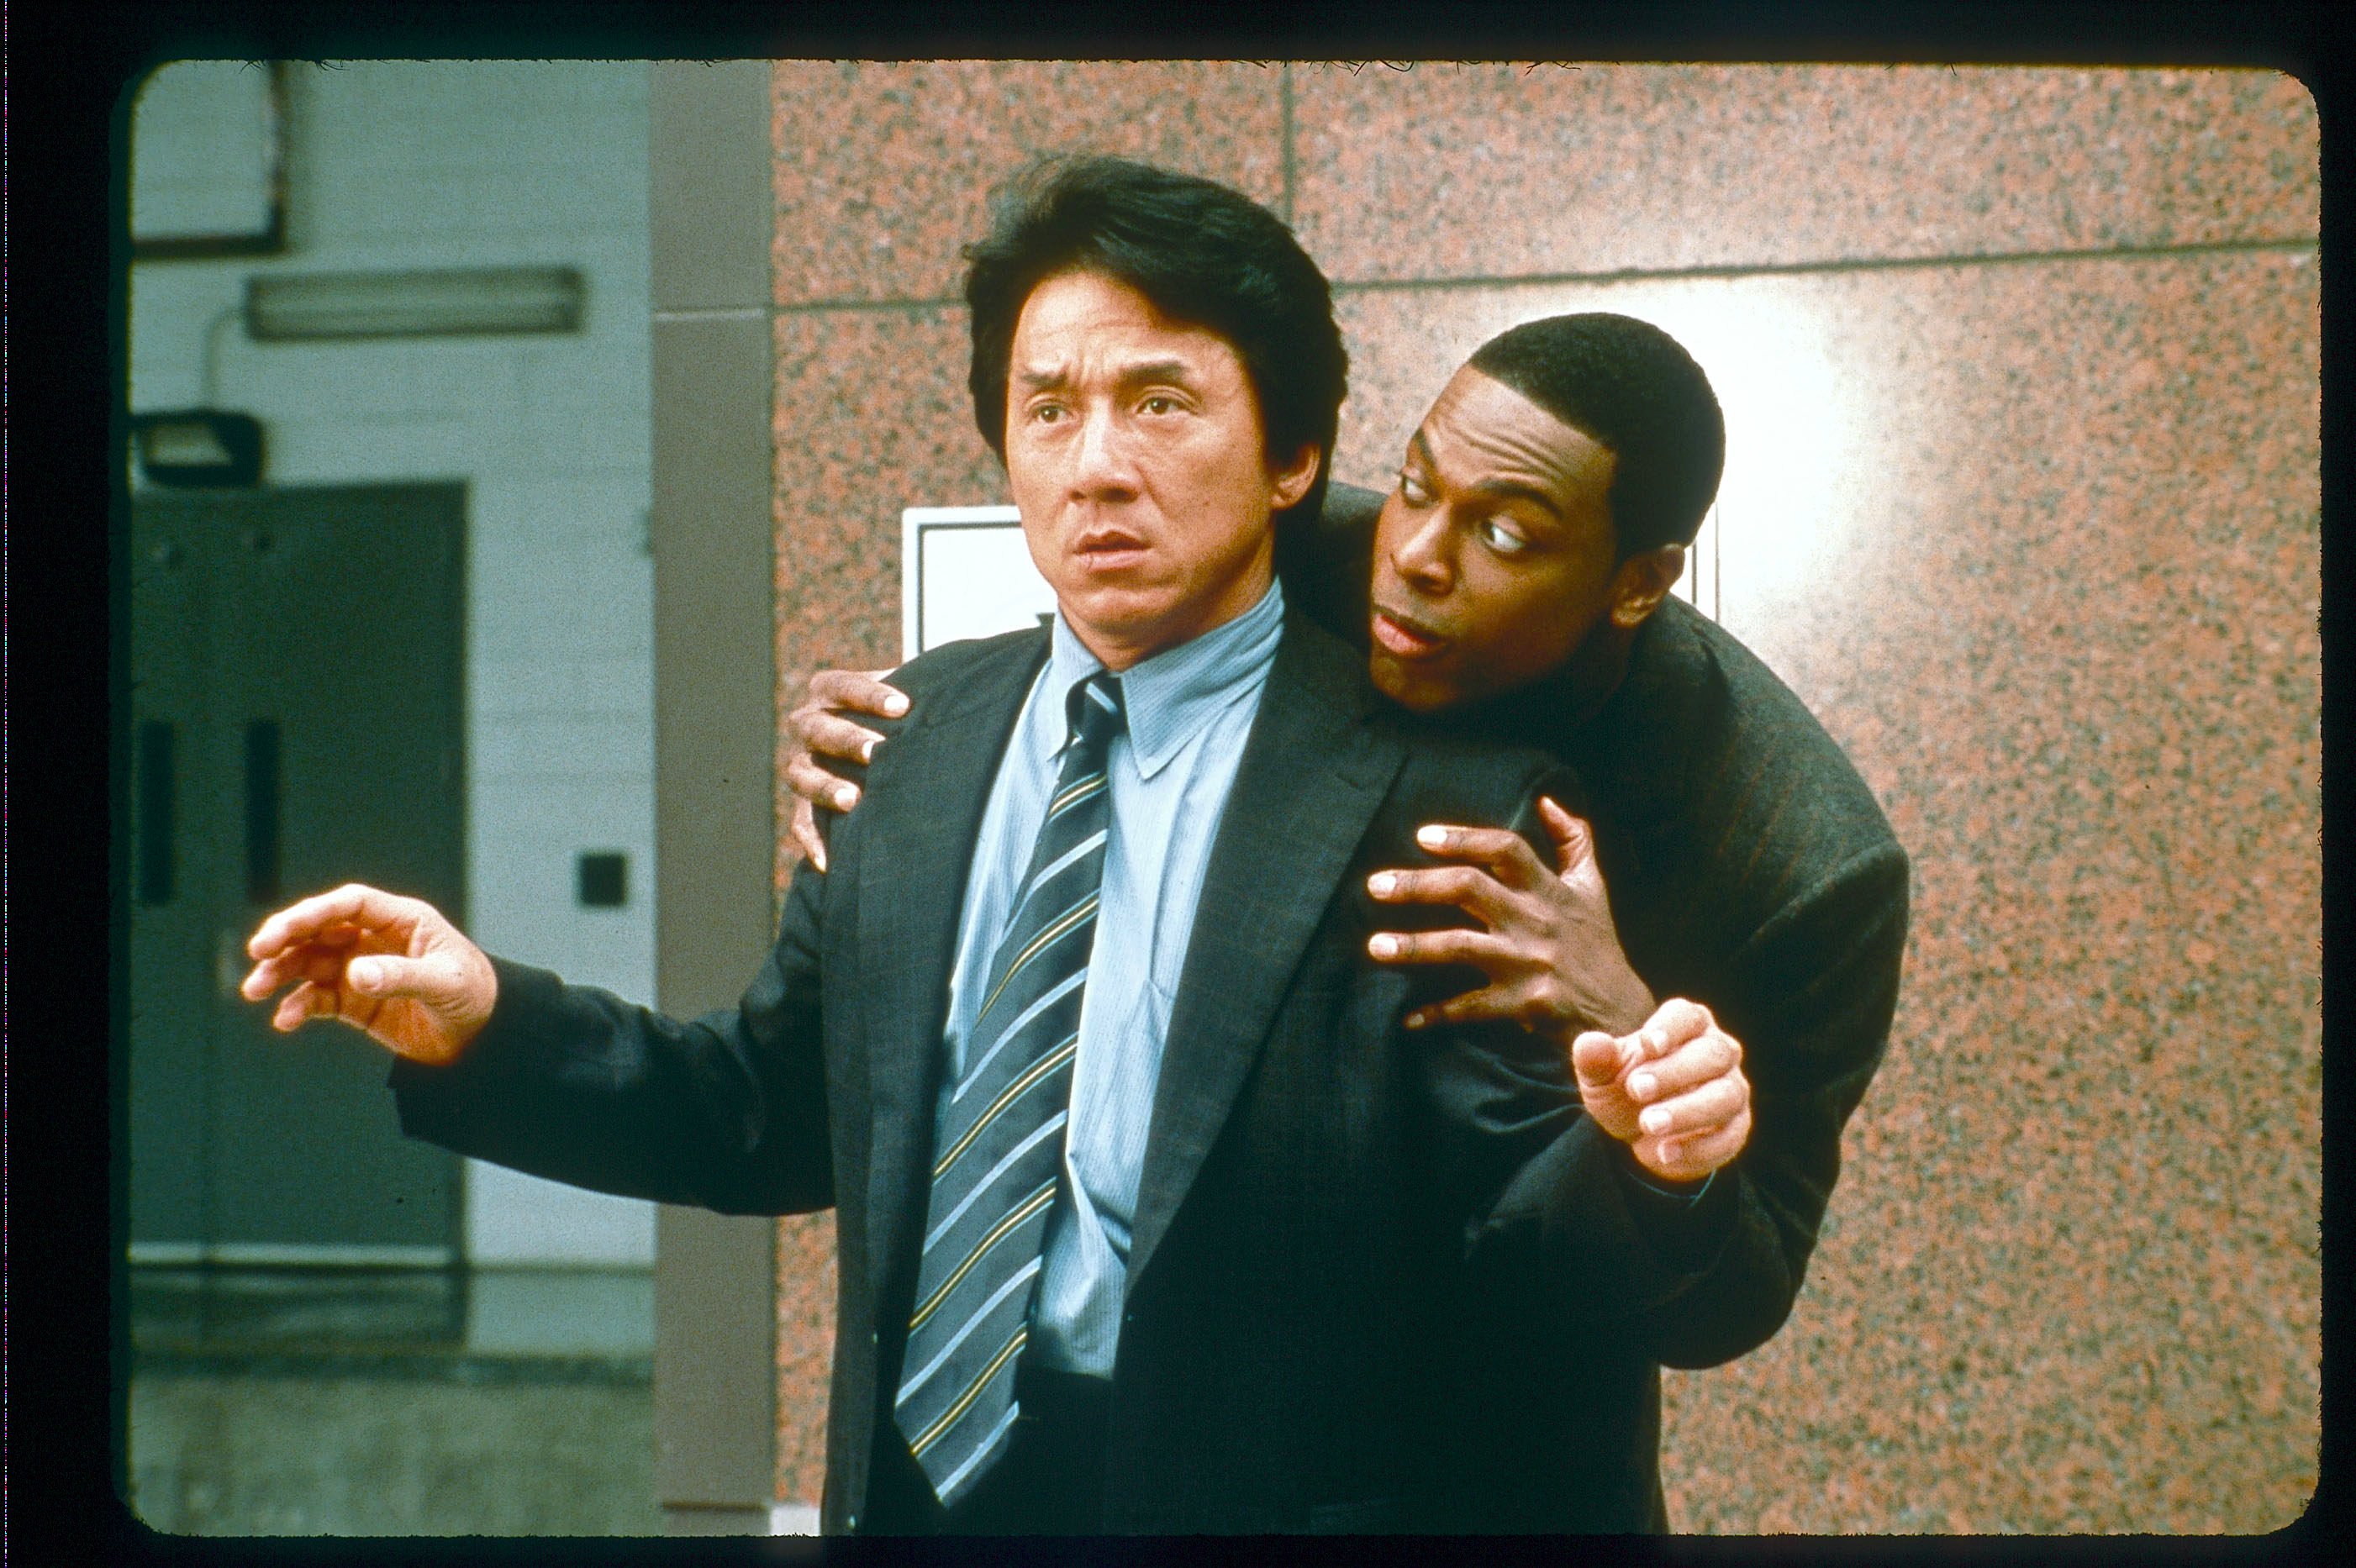 Jackie Chan (left) and Chris Tucker in a still from “Rush Hour 2”. The Rush Hour sequel was a huge success upon release in 2001, but Chan “hated” it. Photo: New Line Cinema